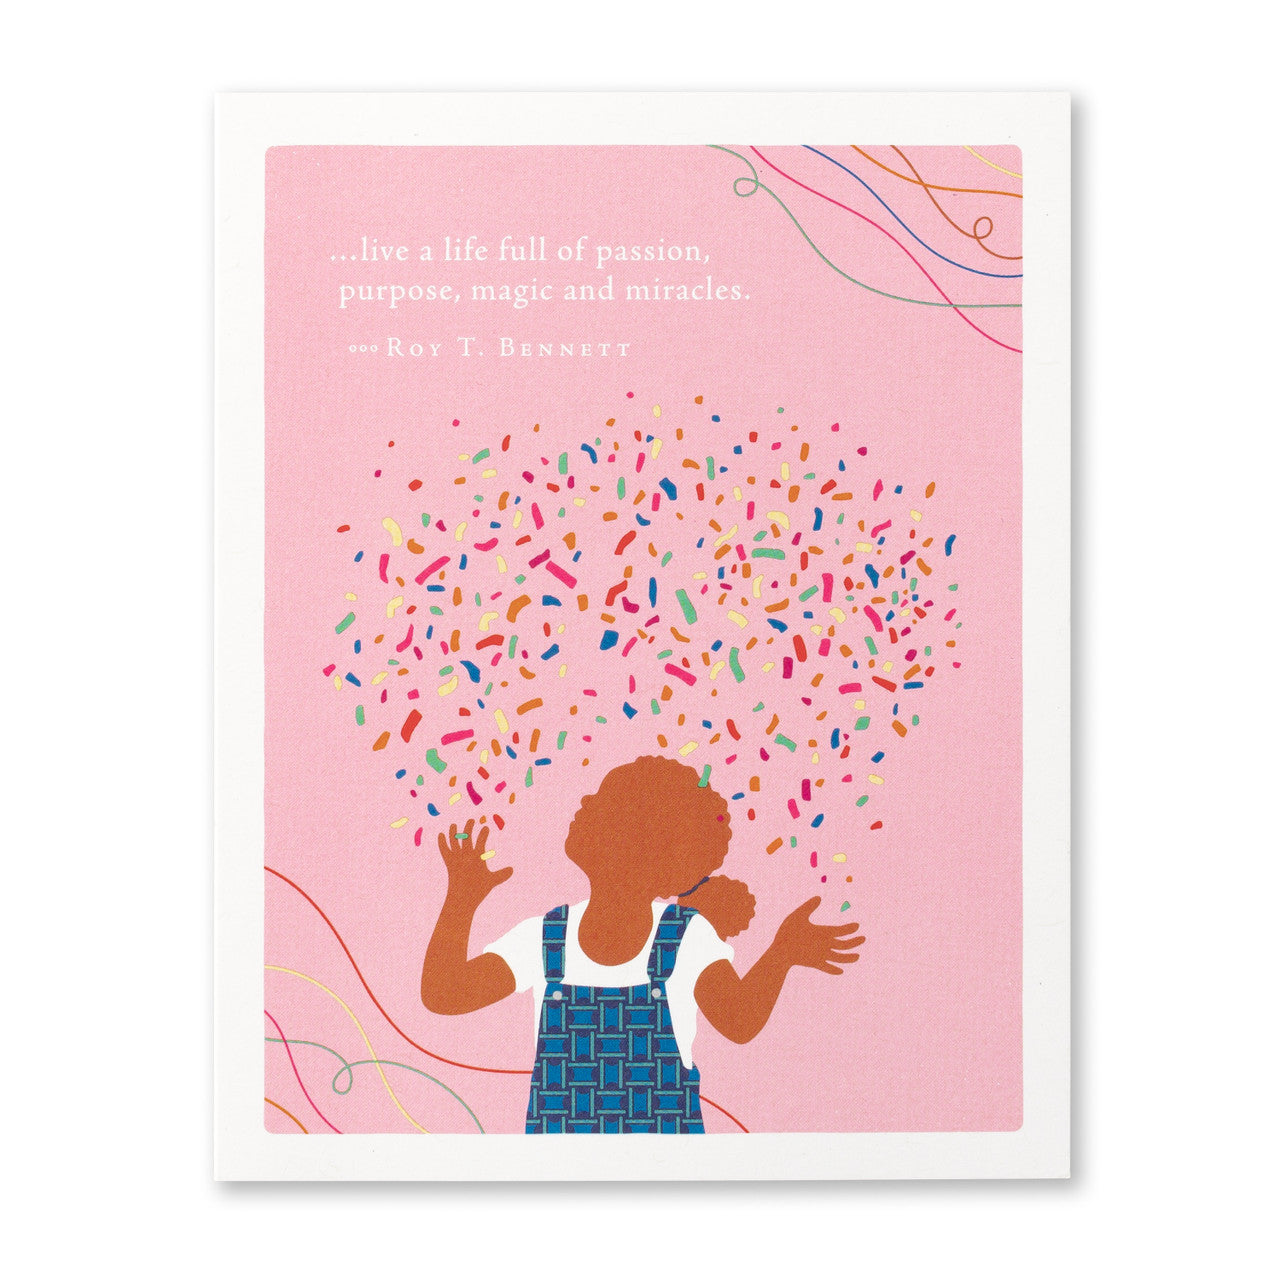 Live A Life Full Of Passion, Purpose, Magic, And Miracles. -Roy T. Bennett - Birthday Greeting Card - Mellow Monkey